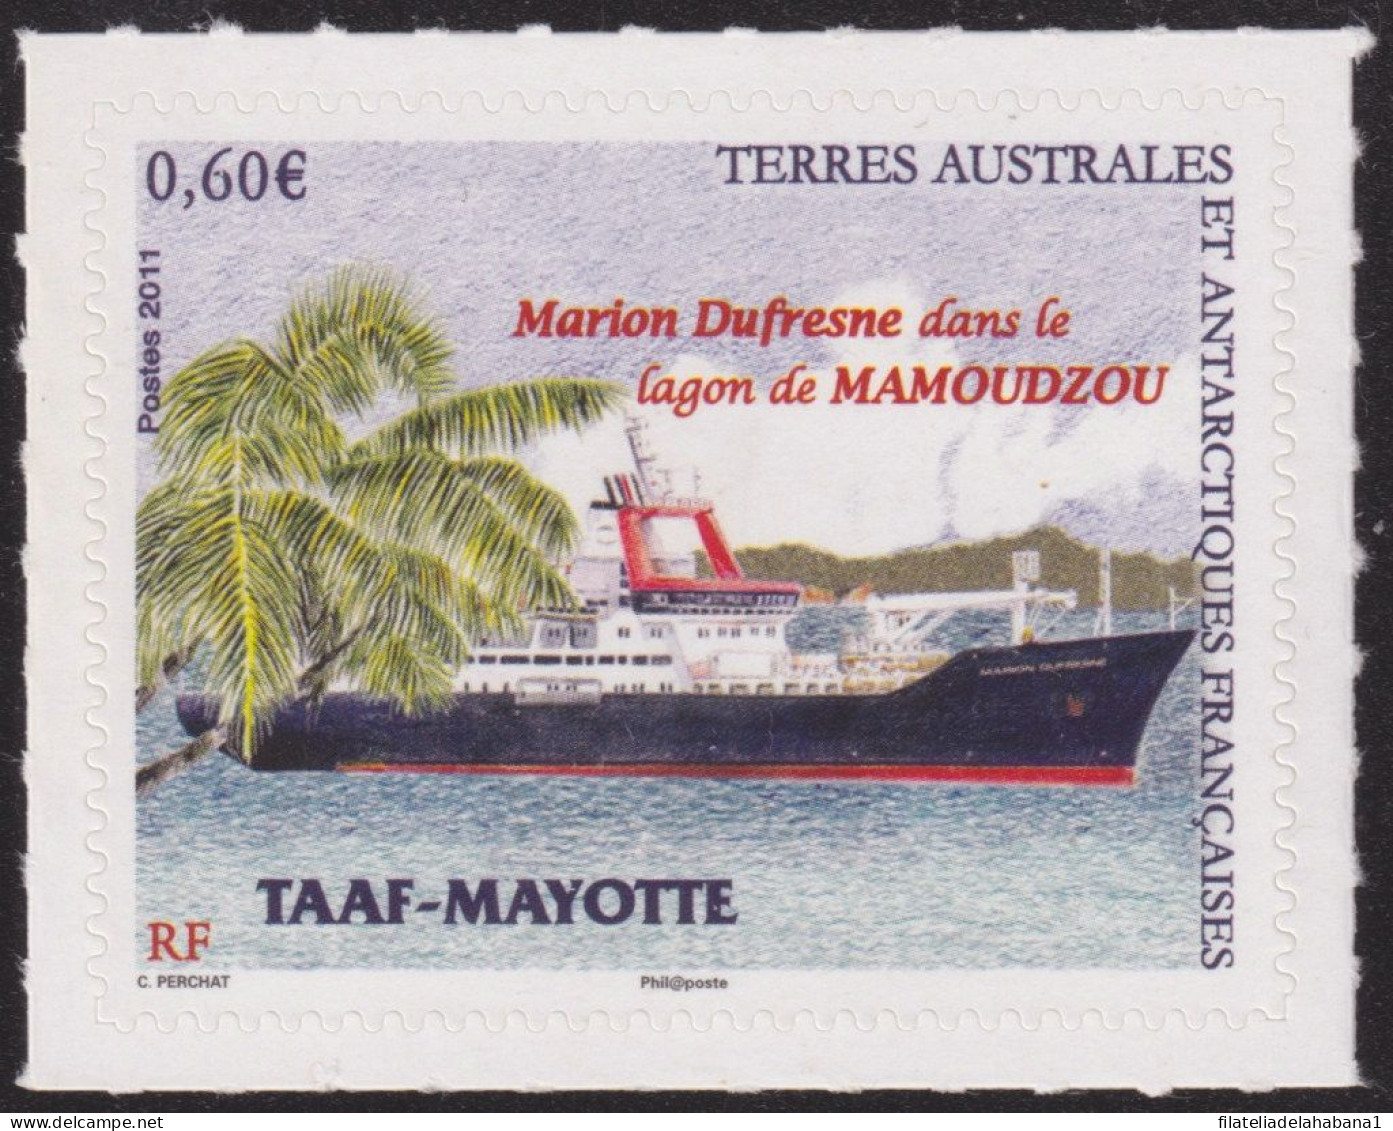 F-EX50302 TAAF MAYOTTE ANTARCTIC MNH 2011 MARION DUFRESNE SHIP ADHESIVE - Schiffe